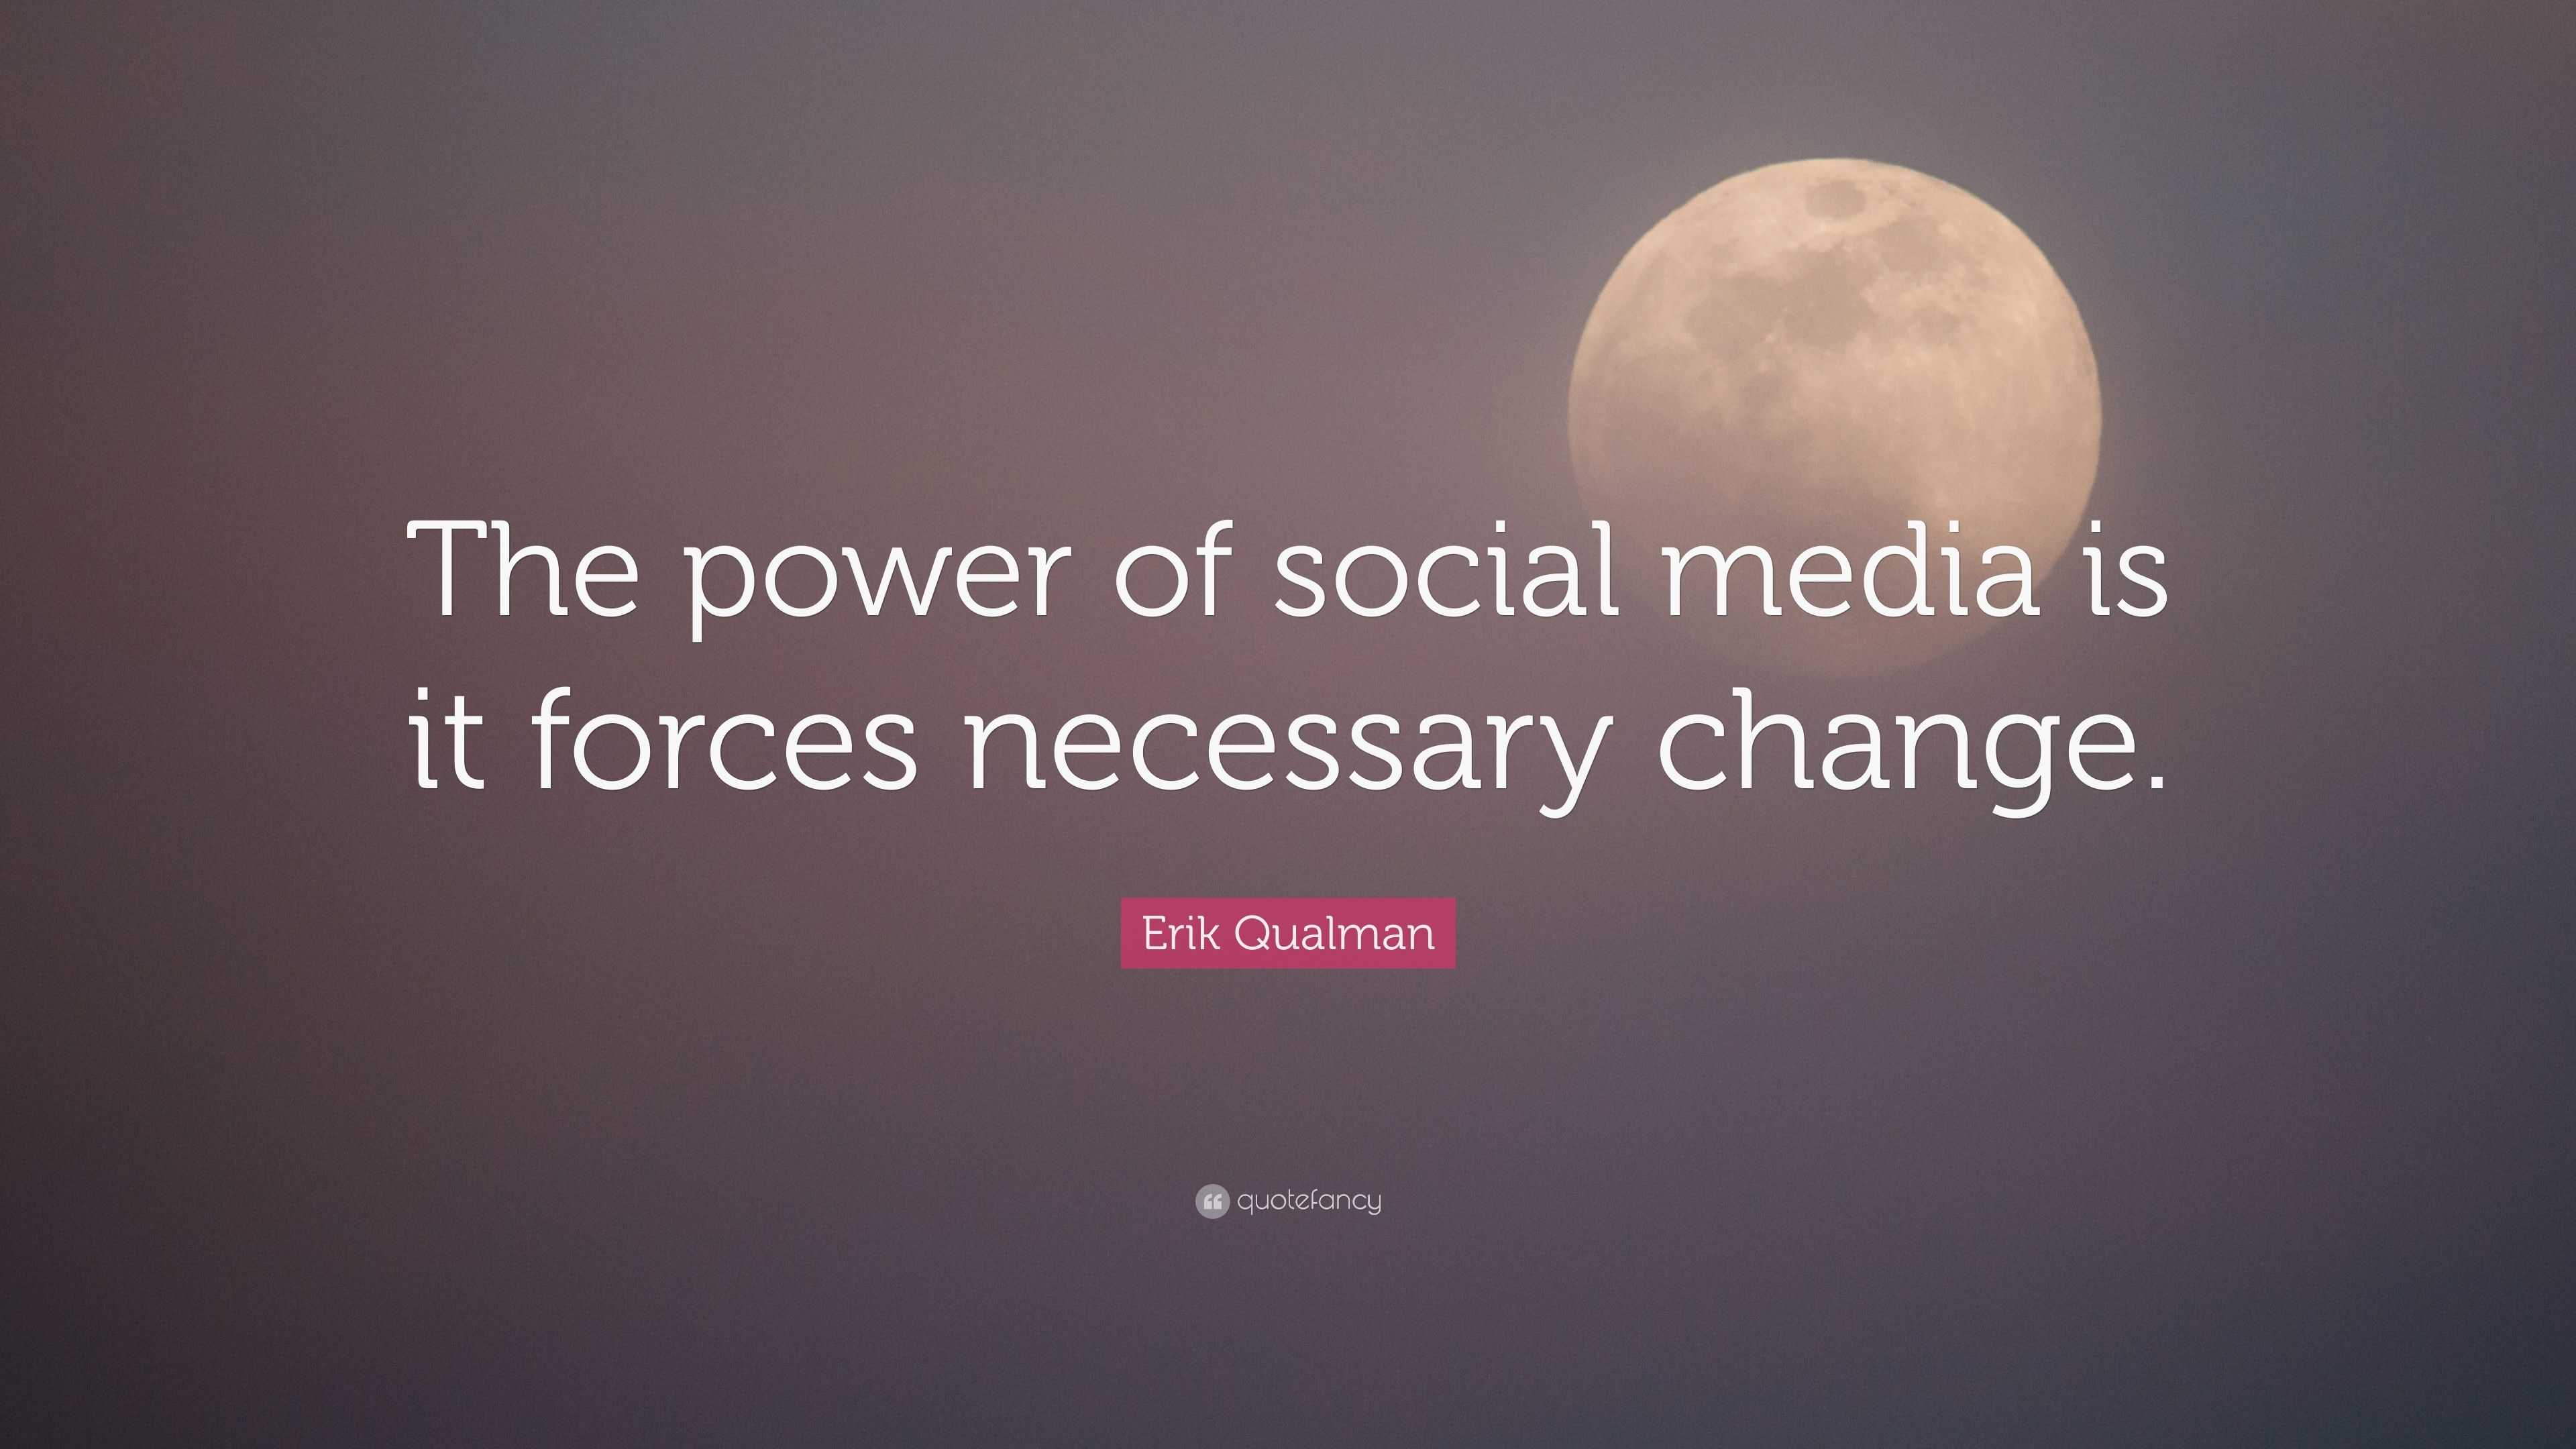 Erik Qualman Quote: “The power of social media is it forces necessary ...